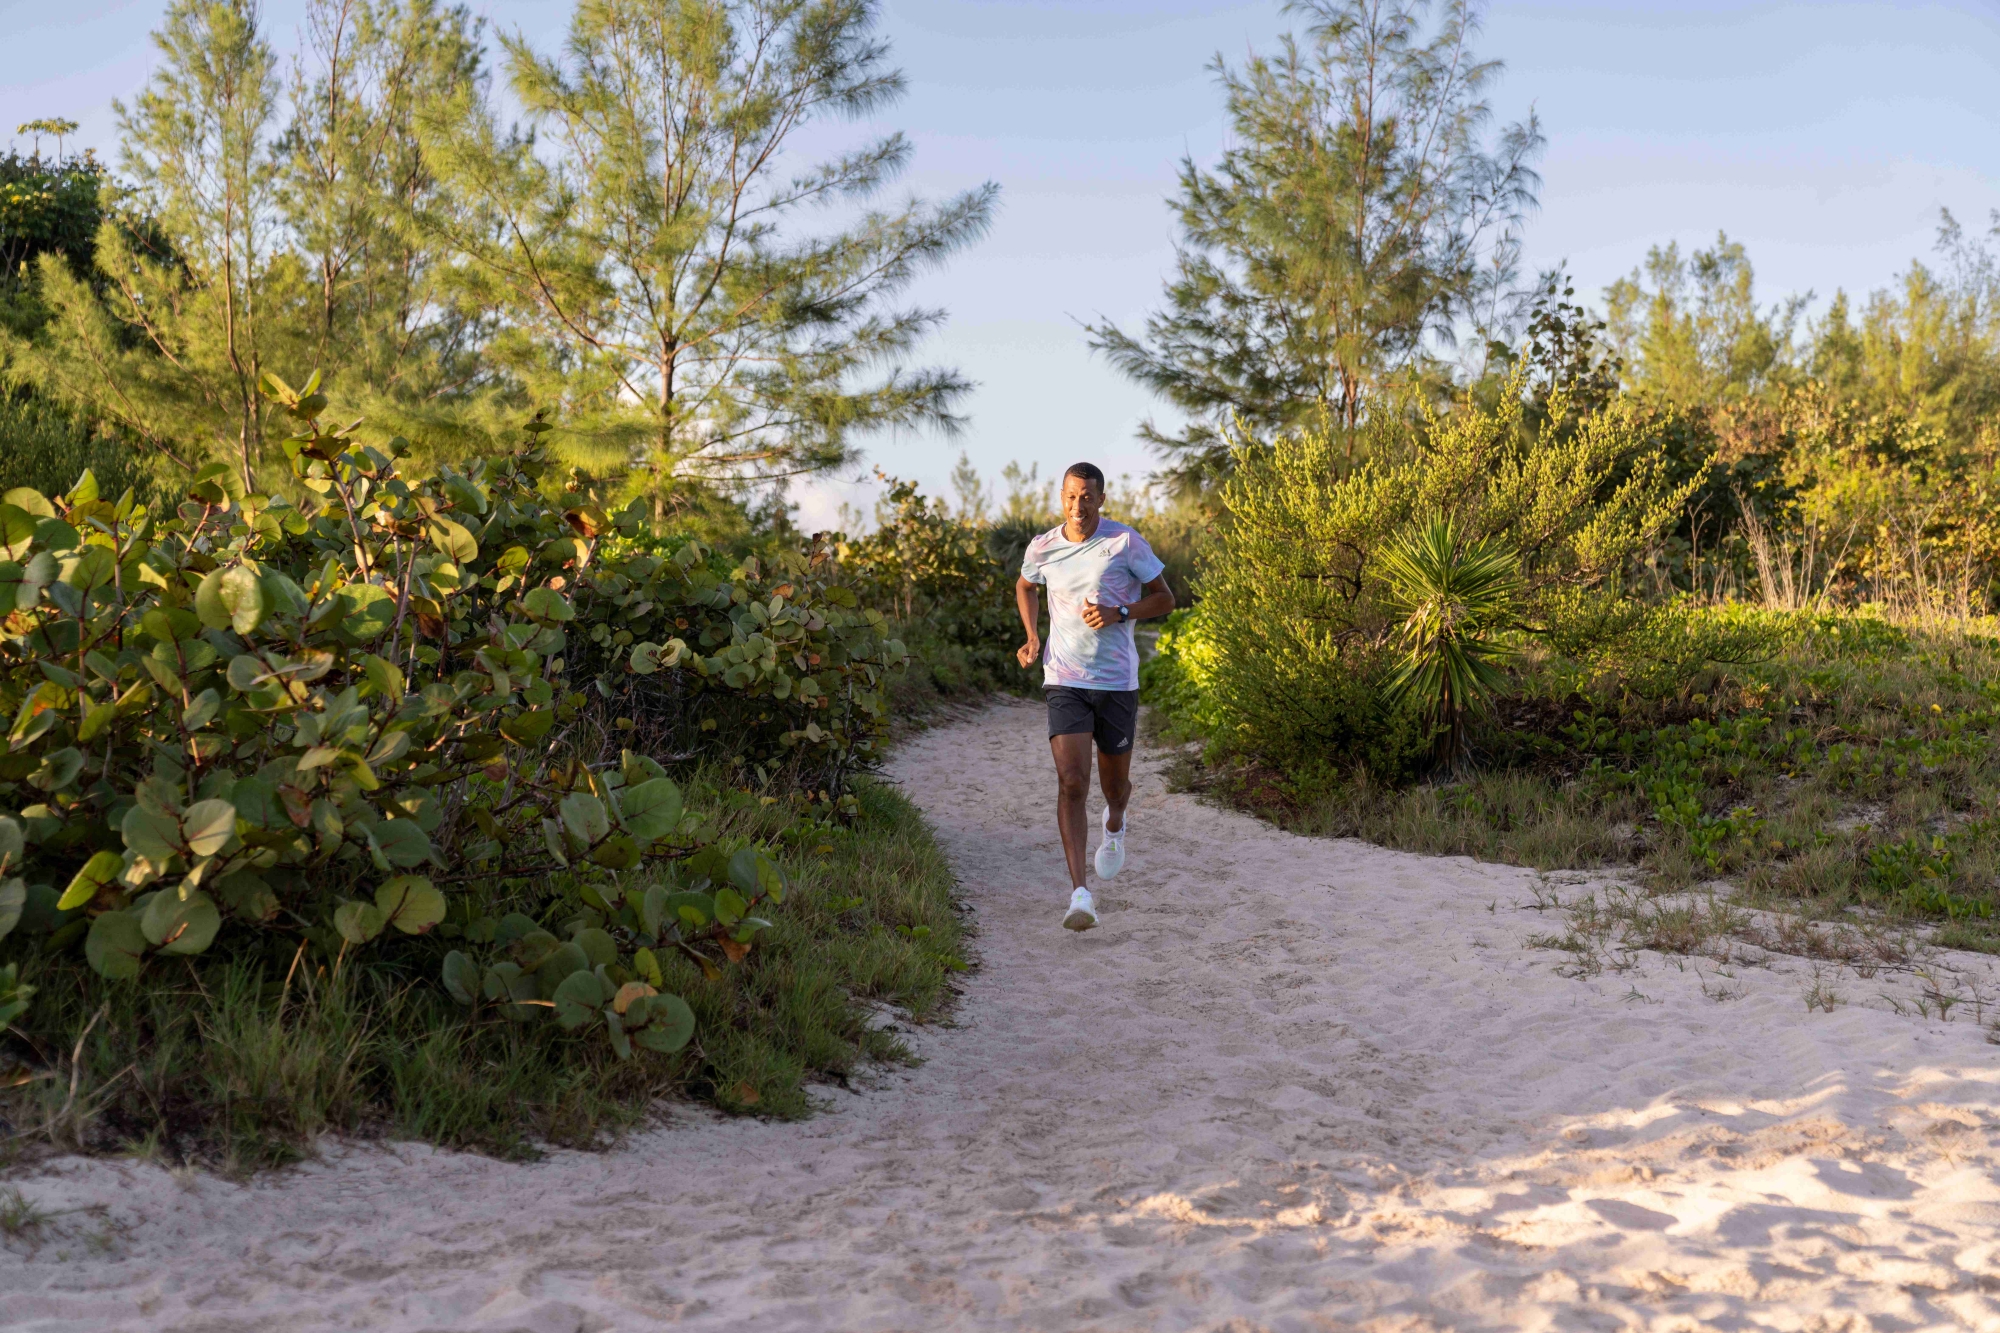 A man is running on a sandy trail.